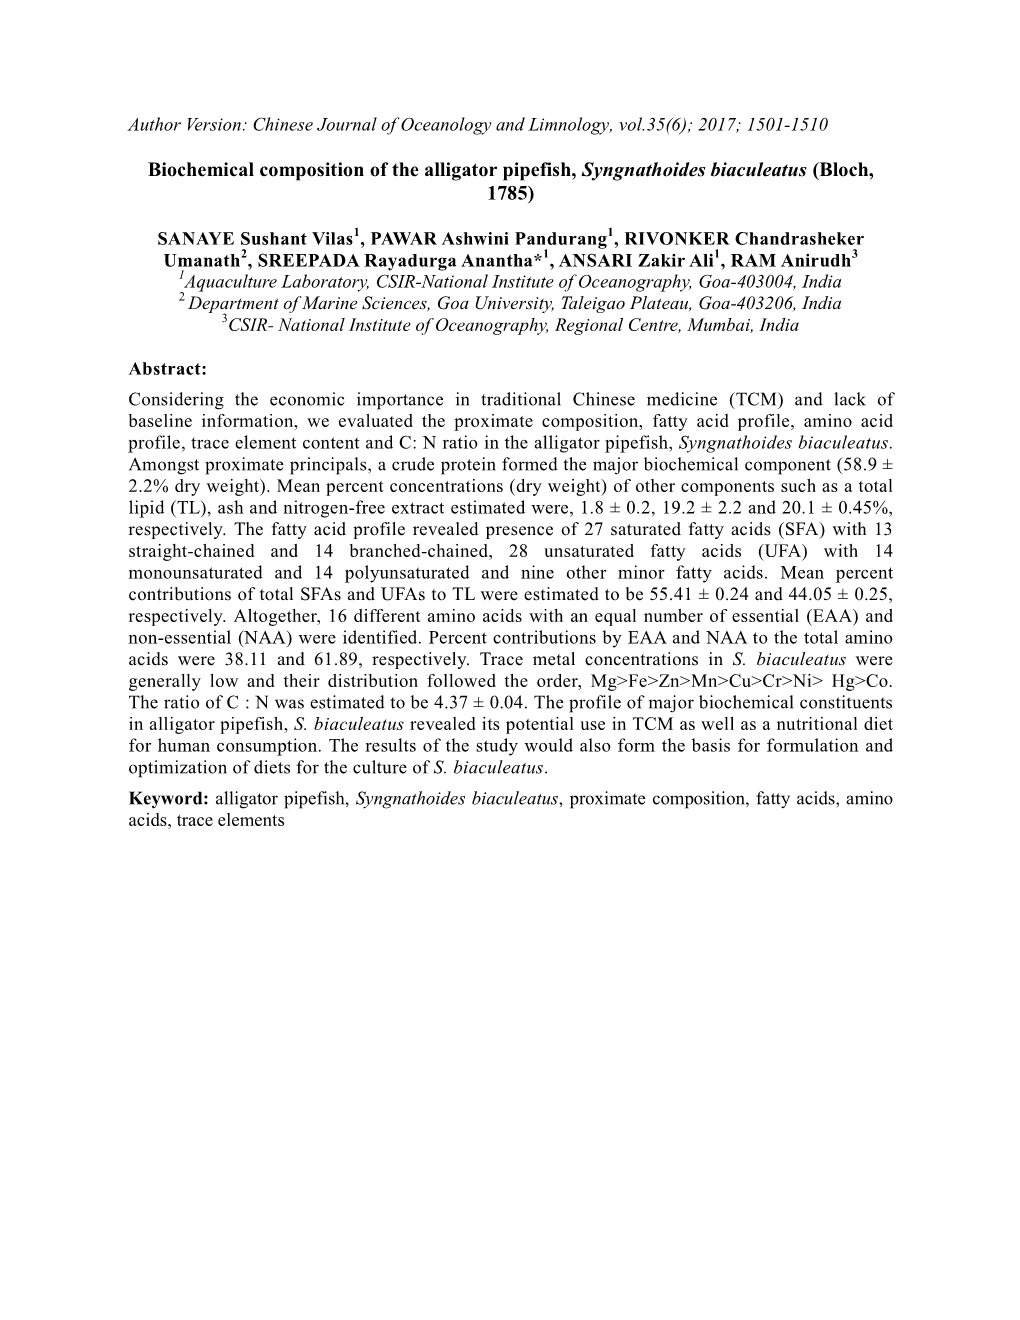 Biochemical Composition of the Alligator Pipefish, Syngnathoides Biaculeatus (Bloch, 1785)